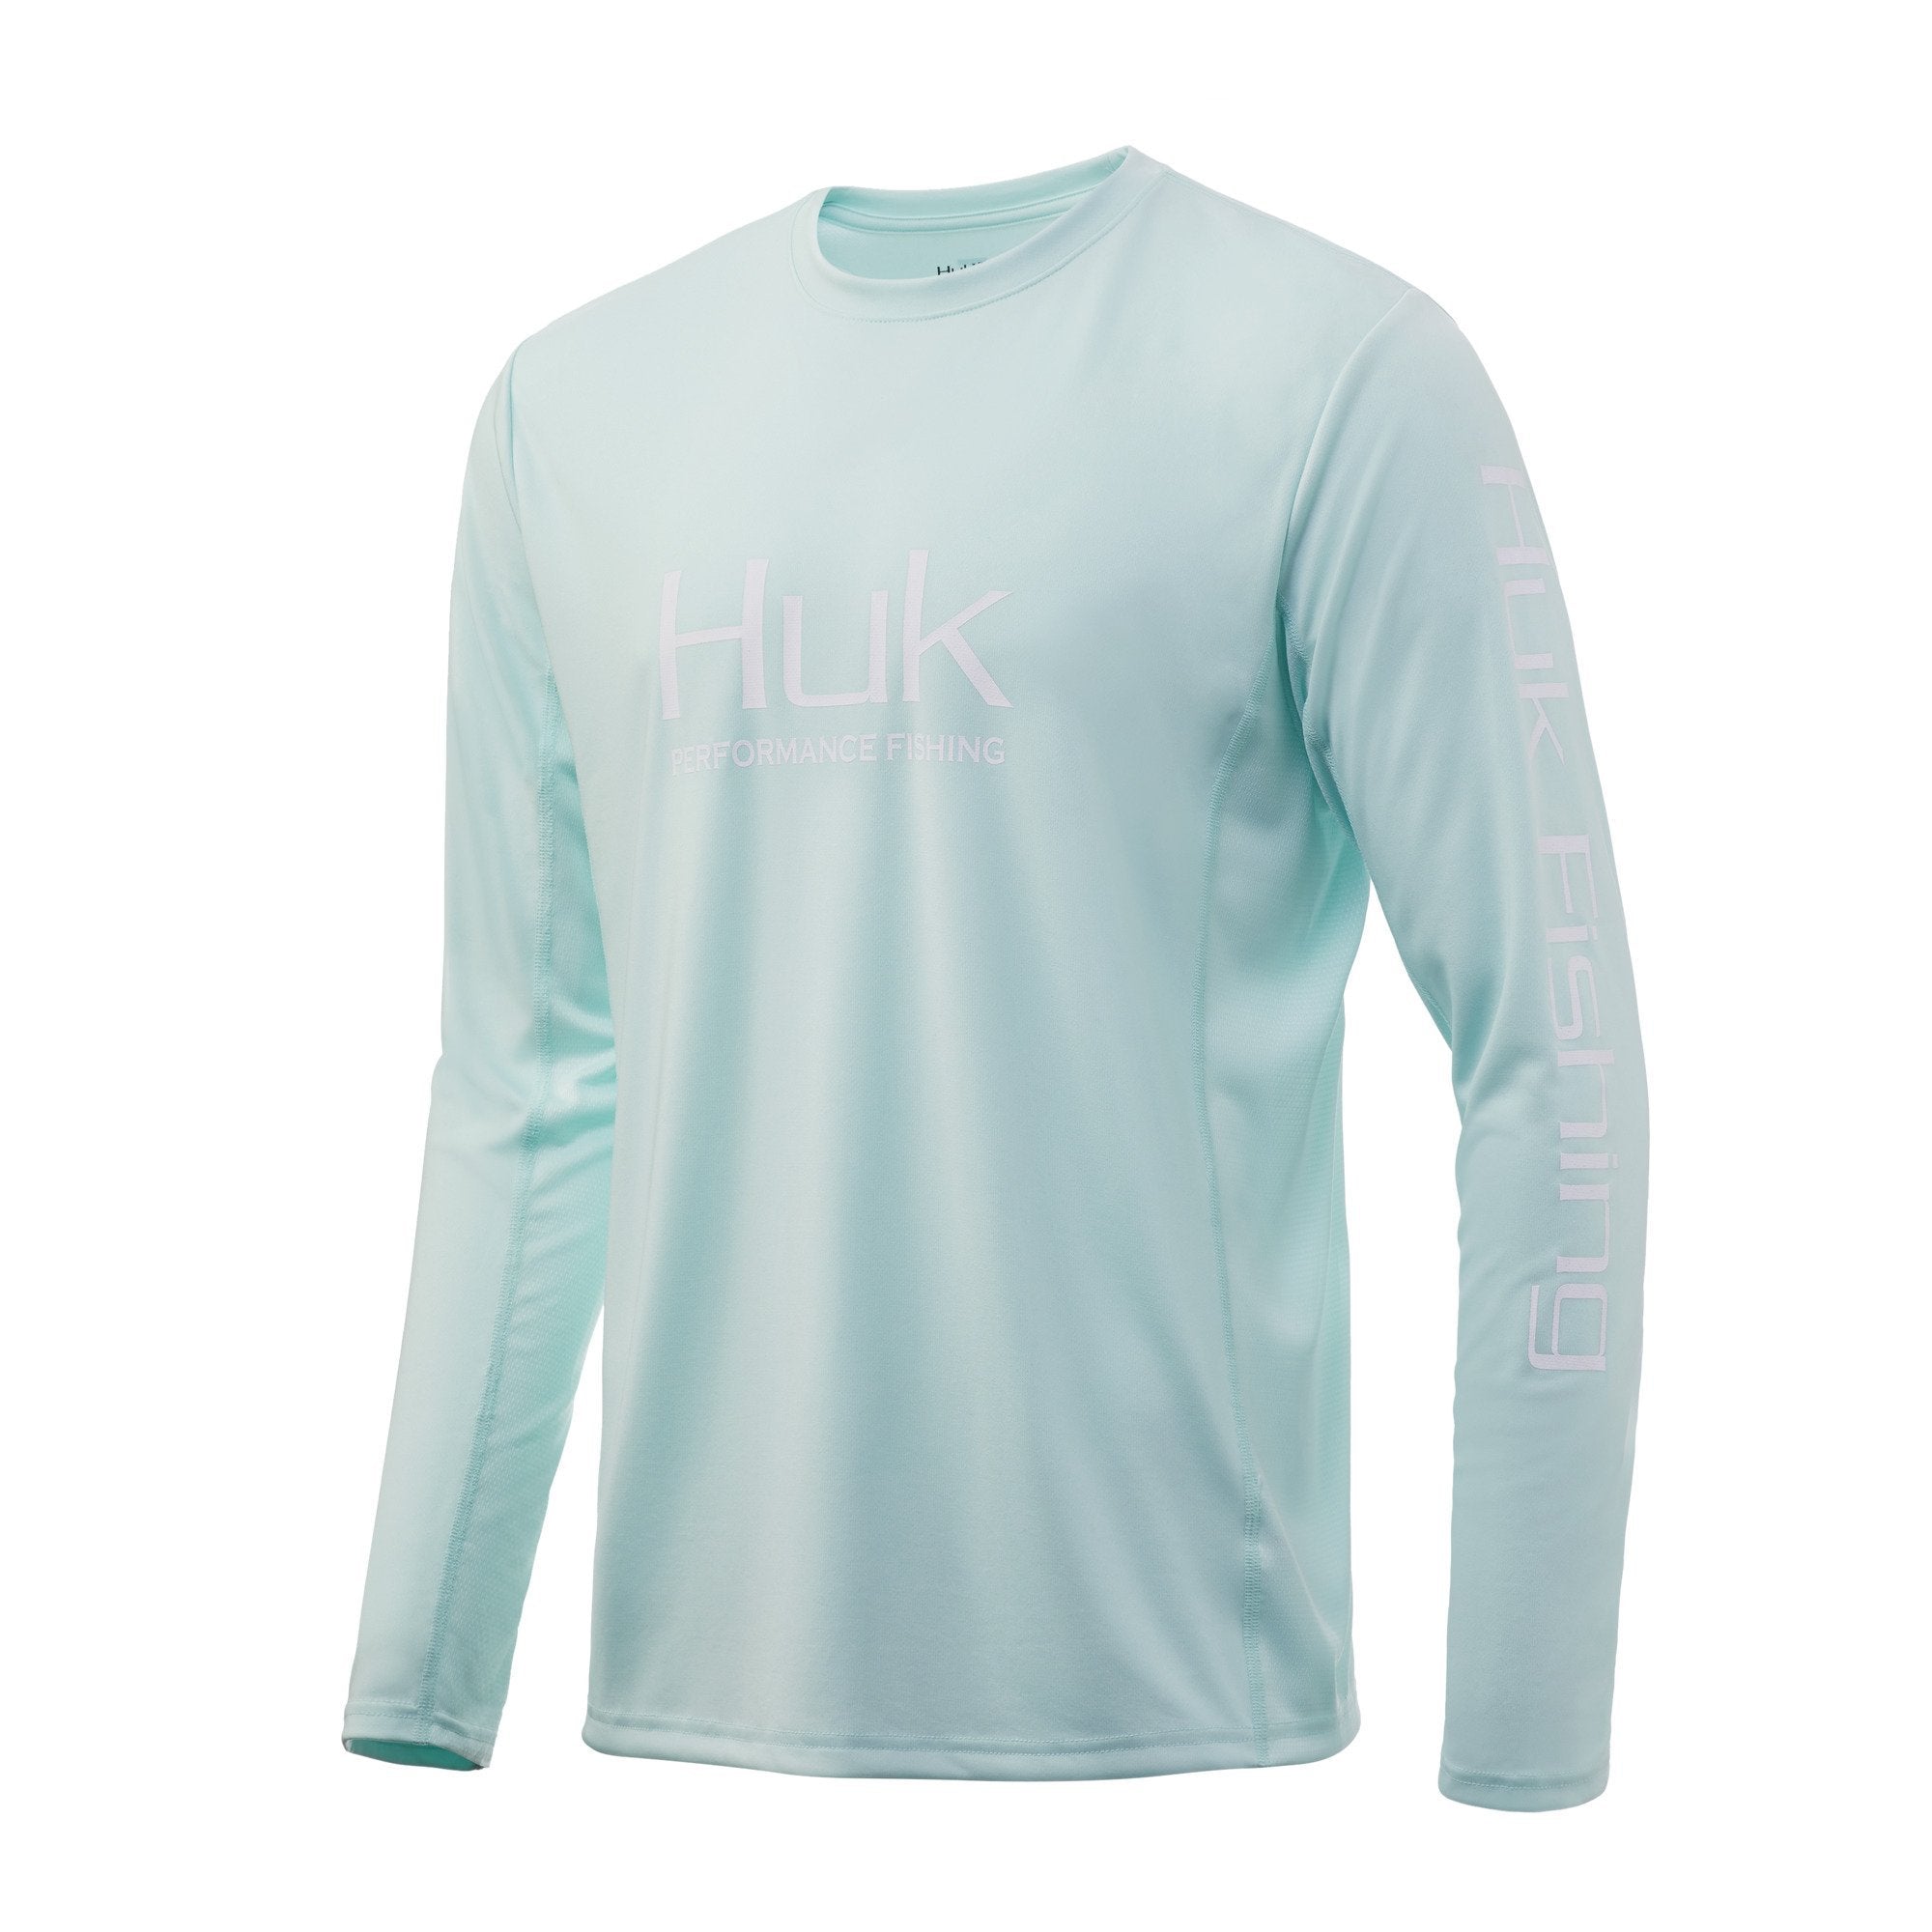 Huk Polyester Athletic Long Sleeve Shirts for Men